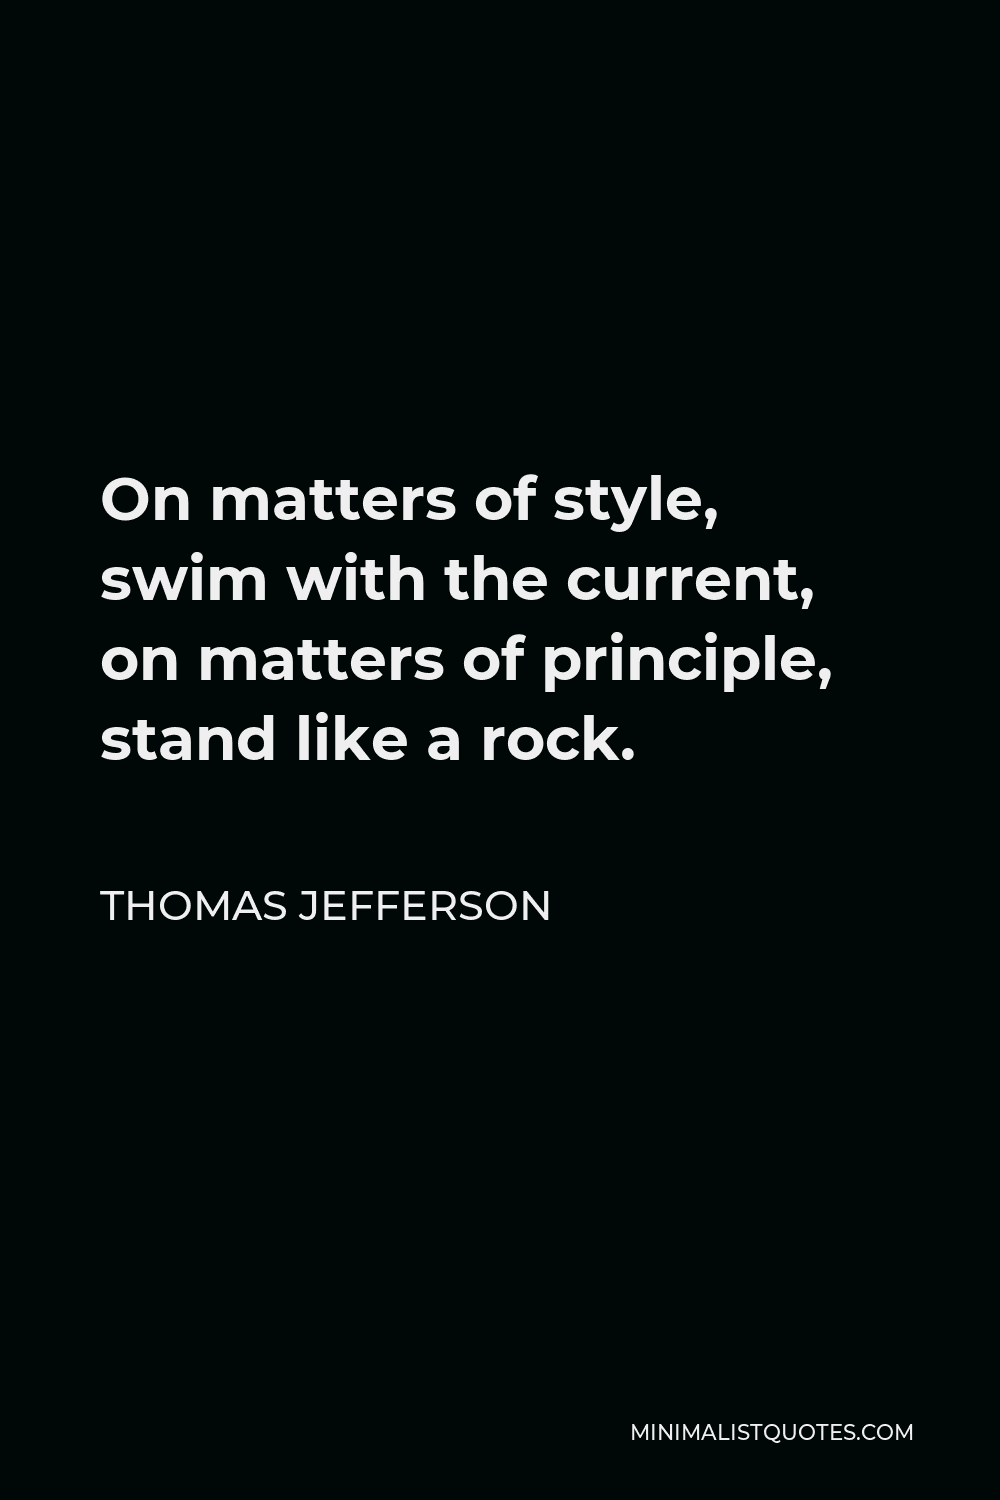 Thomas Jefferson Quote - On matters of style, swim with the current, on matters of principle, stand like a rock.